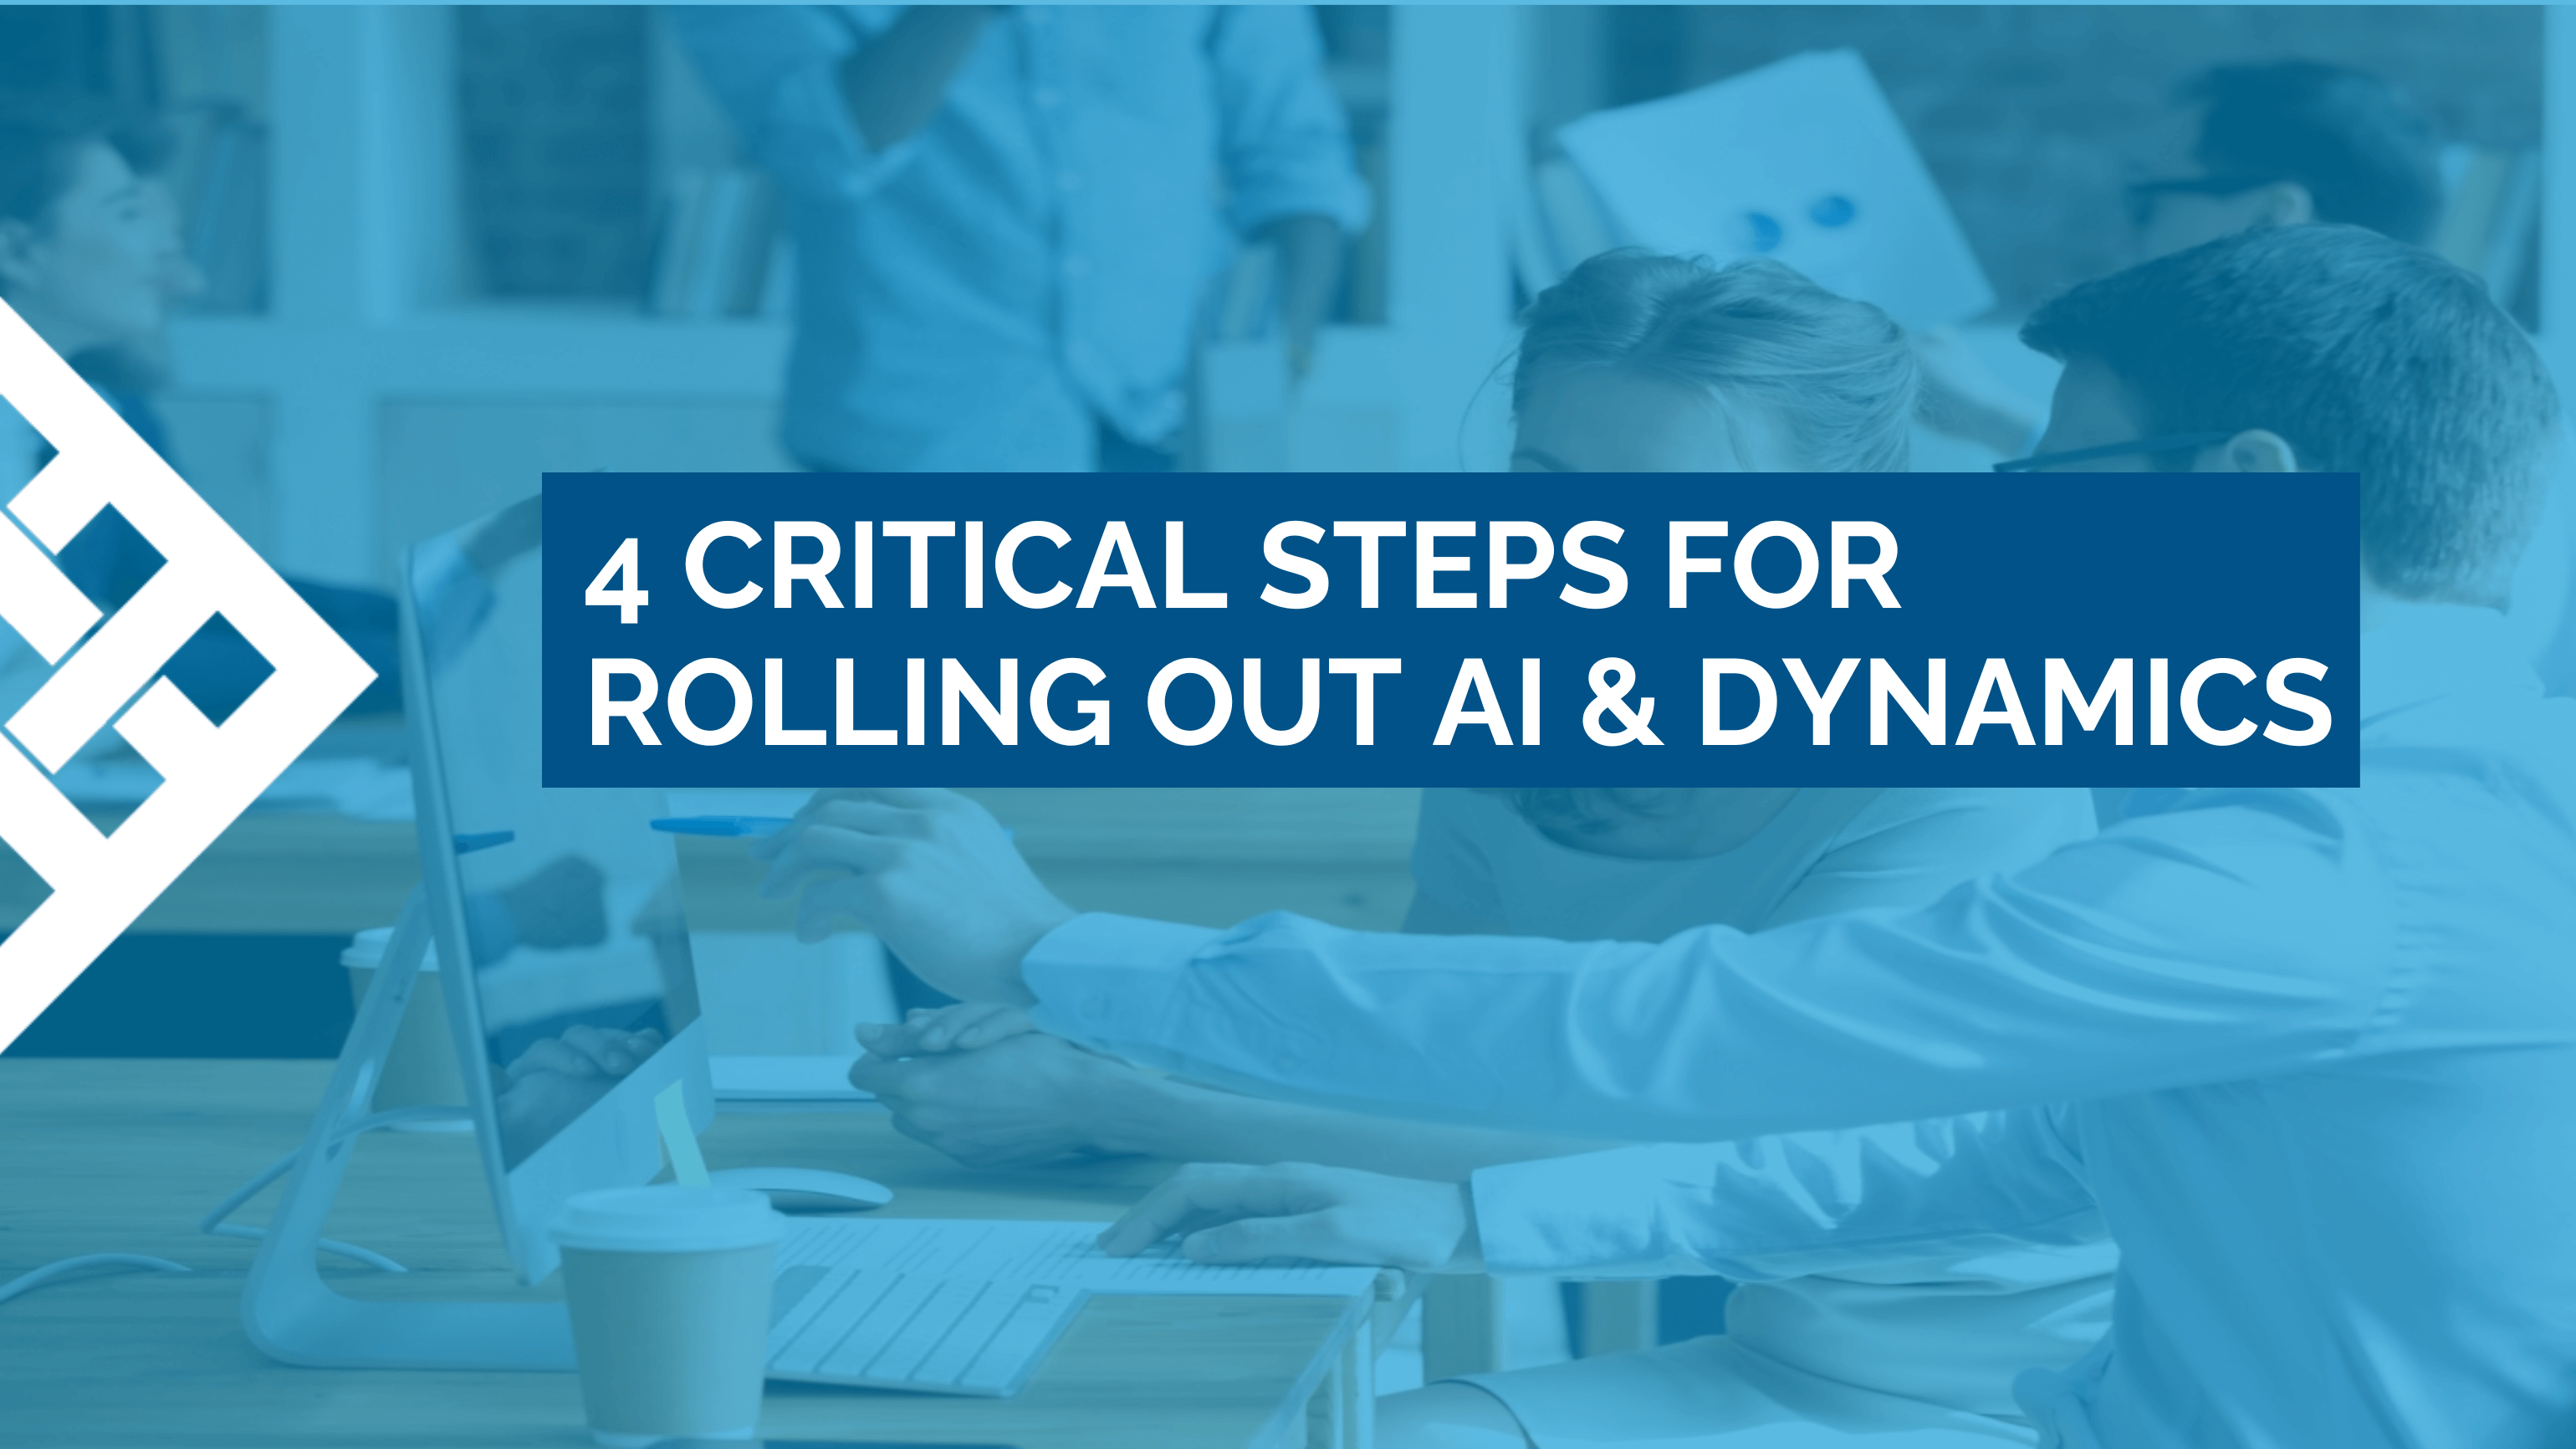 4 critical steps for rolling out ai and dynamics - company teammates collaborating image